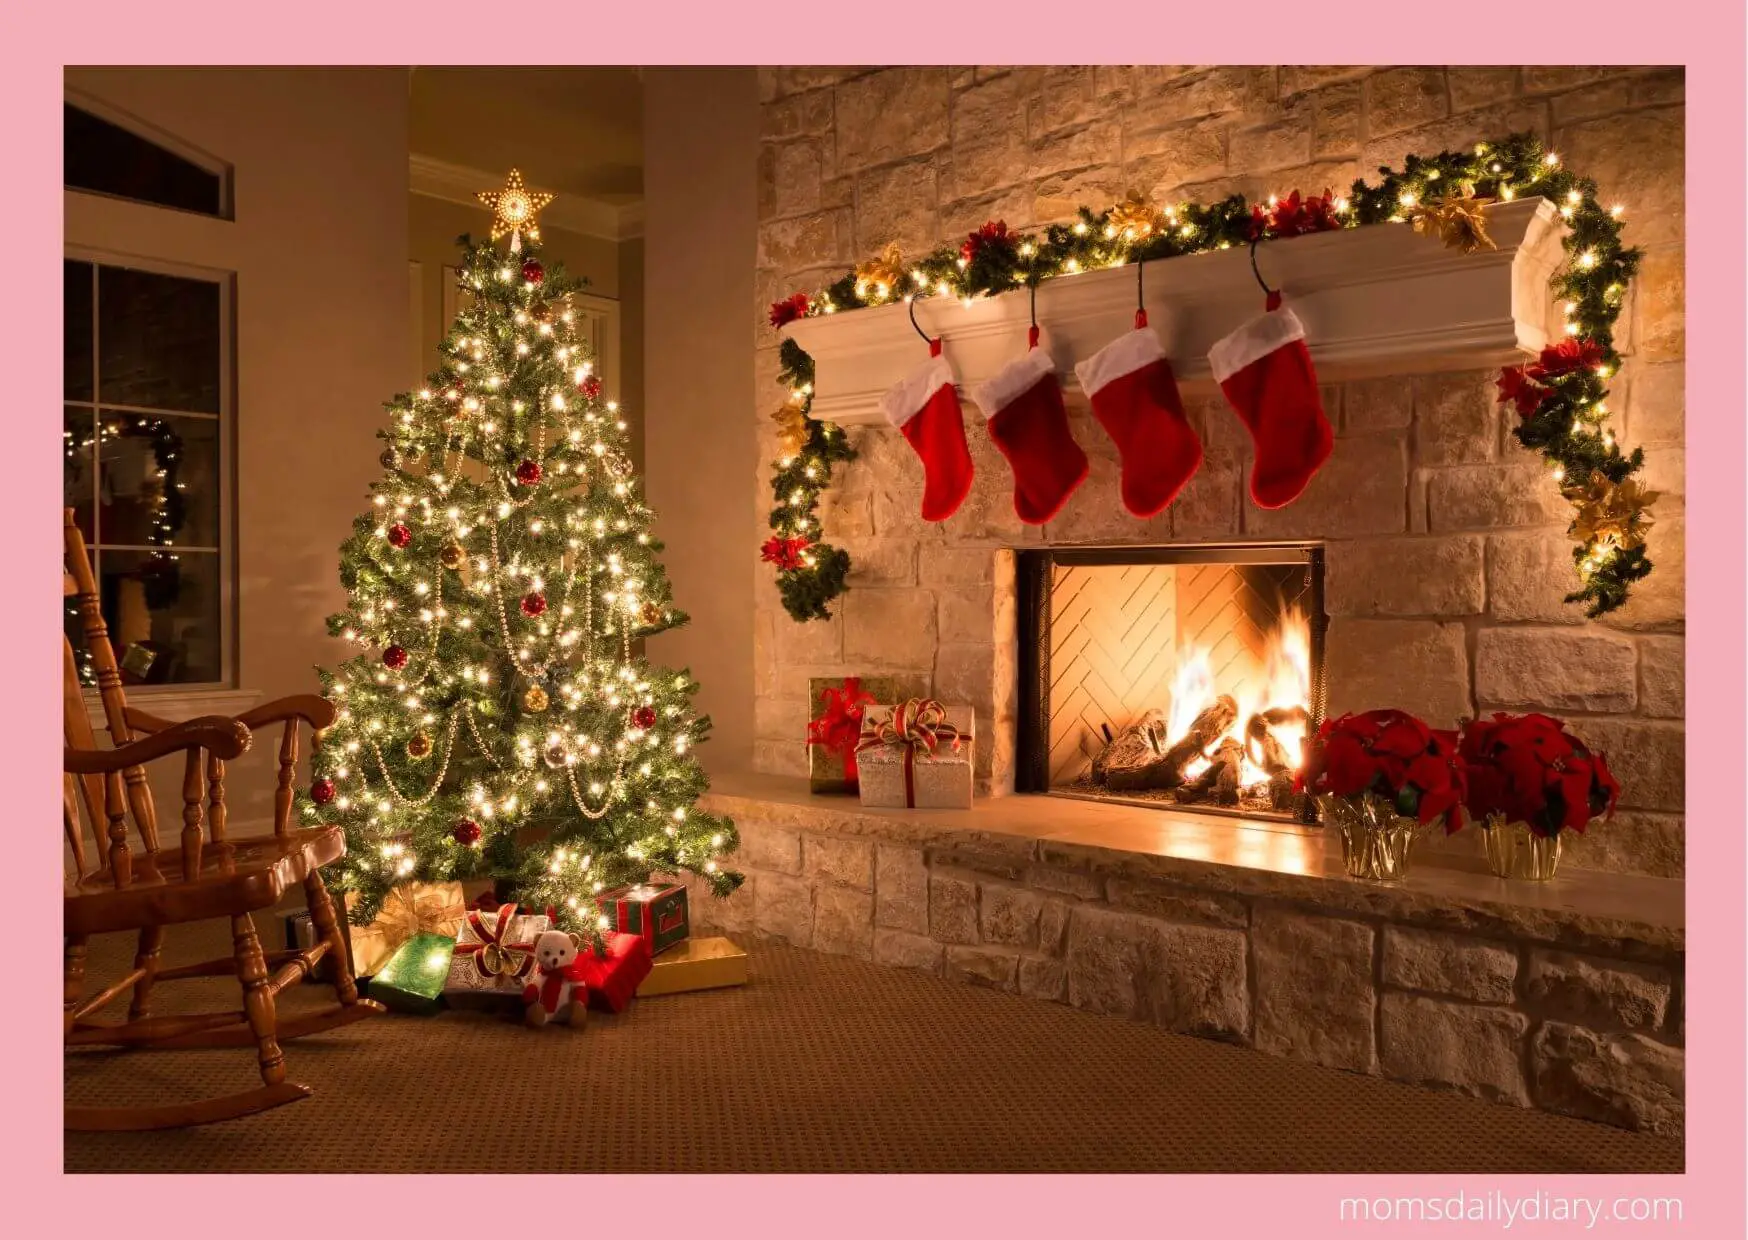 Image of a room decorated for Christmas with stockings hanging over the fireplace.